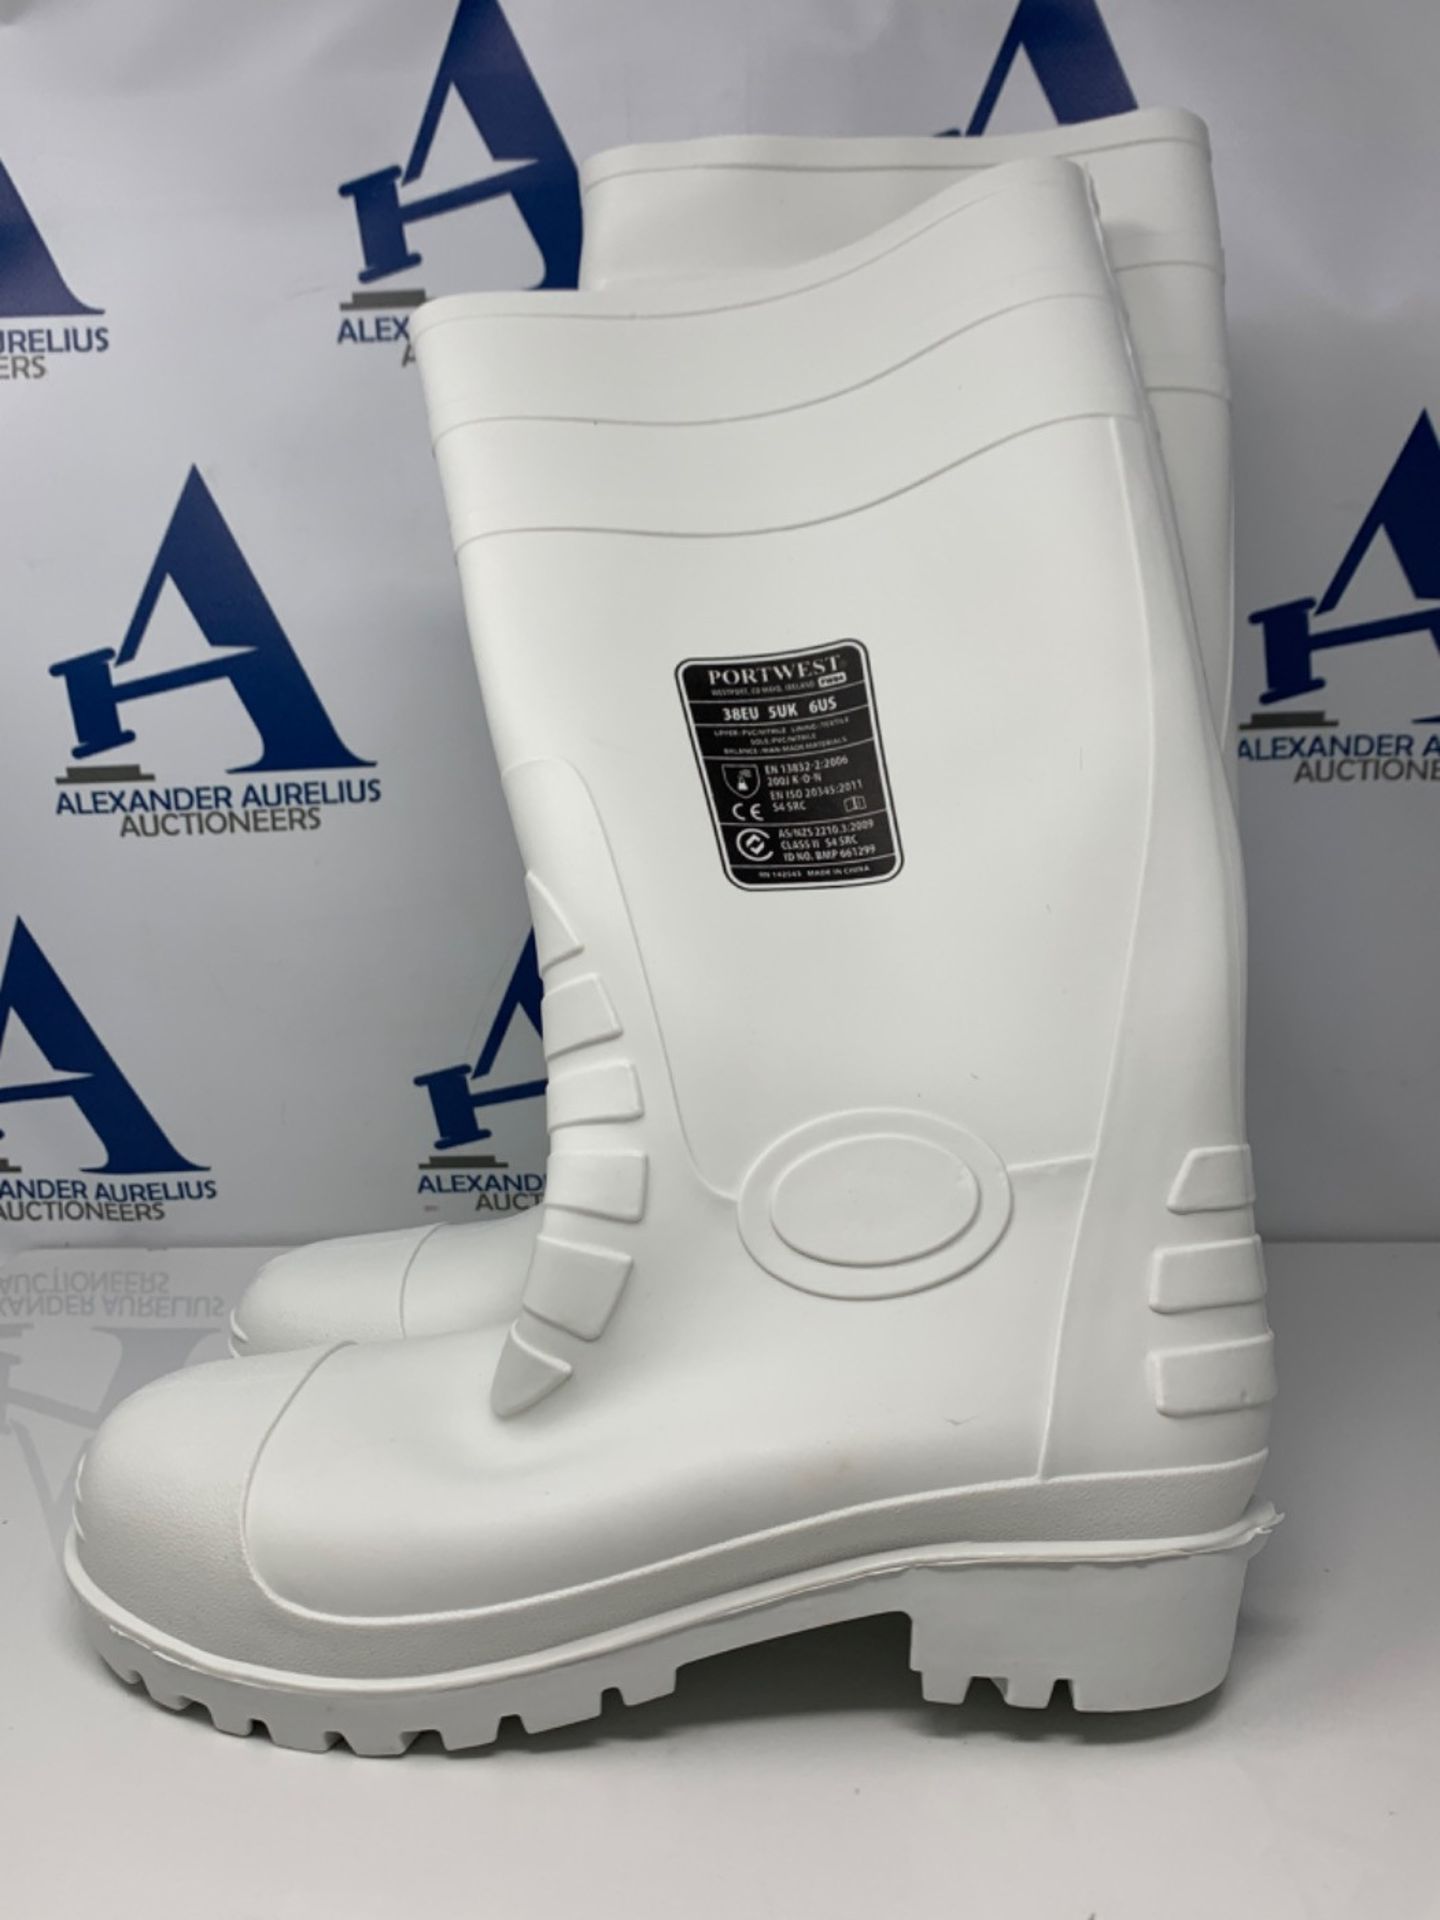 Portwest Safety Food Wellington S4, Size: 38, Colour: White, FW84WHR38 - Image 3 of 3